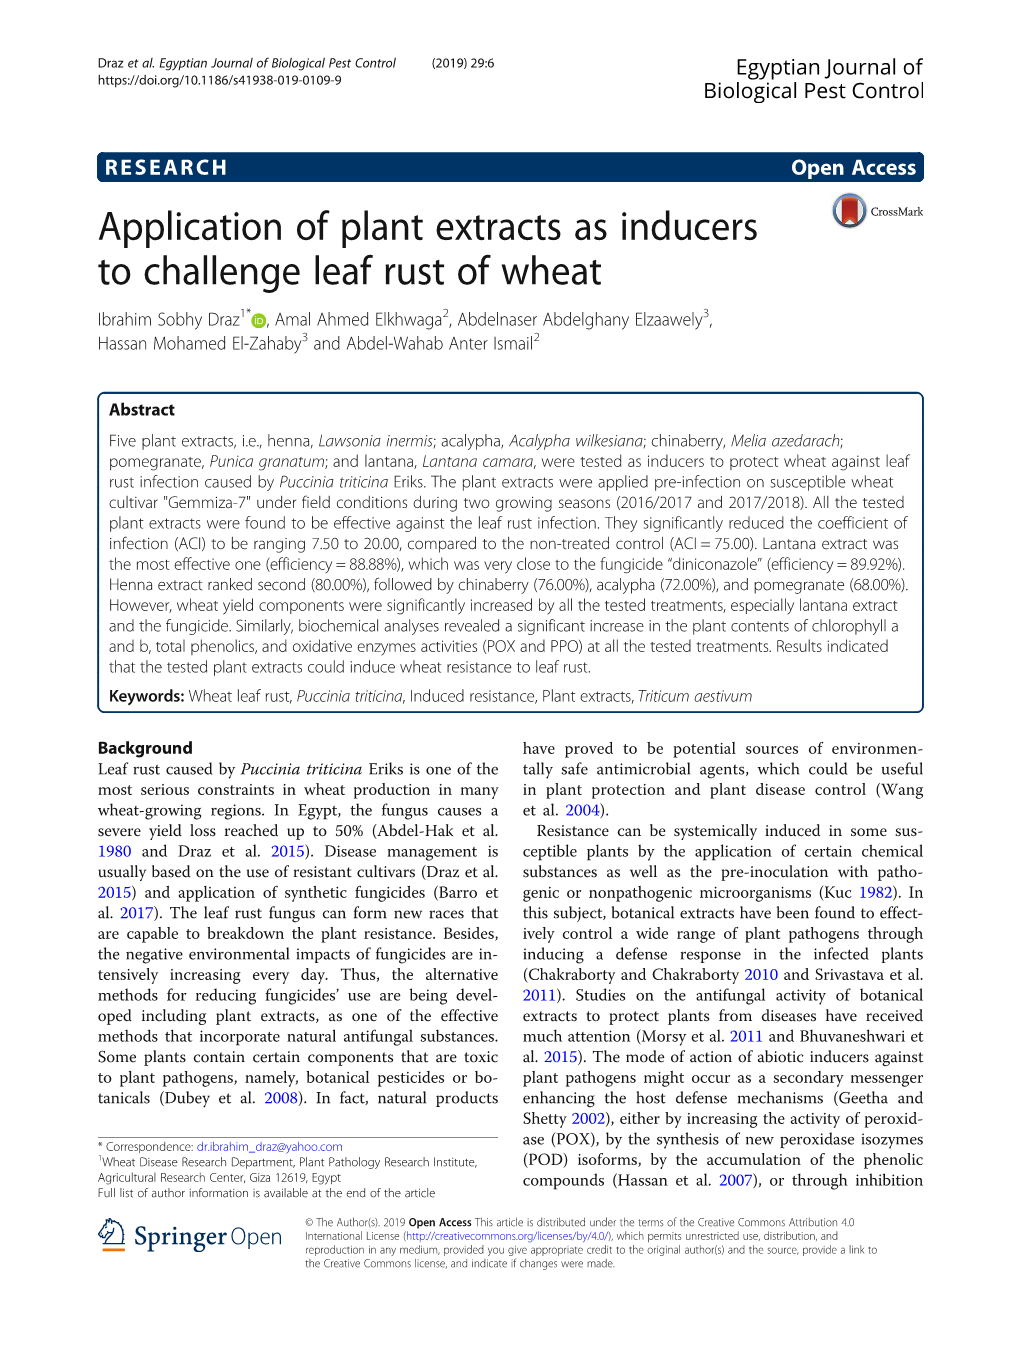 Application of Plant Extracts As Inducers to Challenge Leaf Rust Of